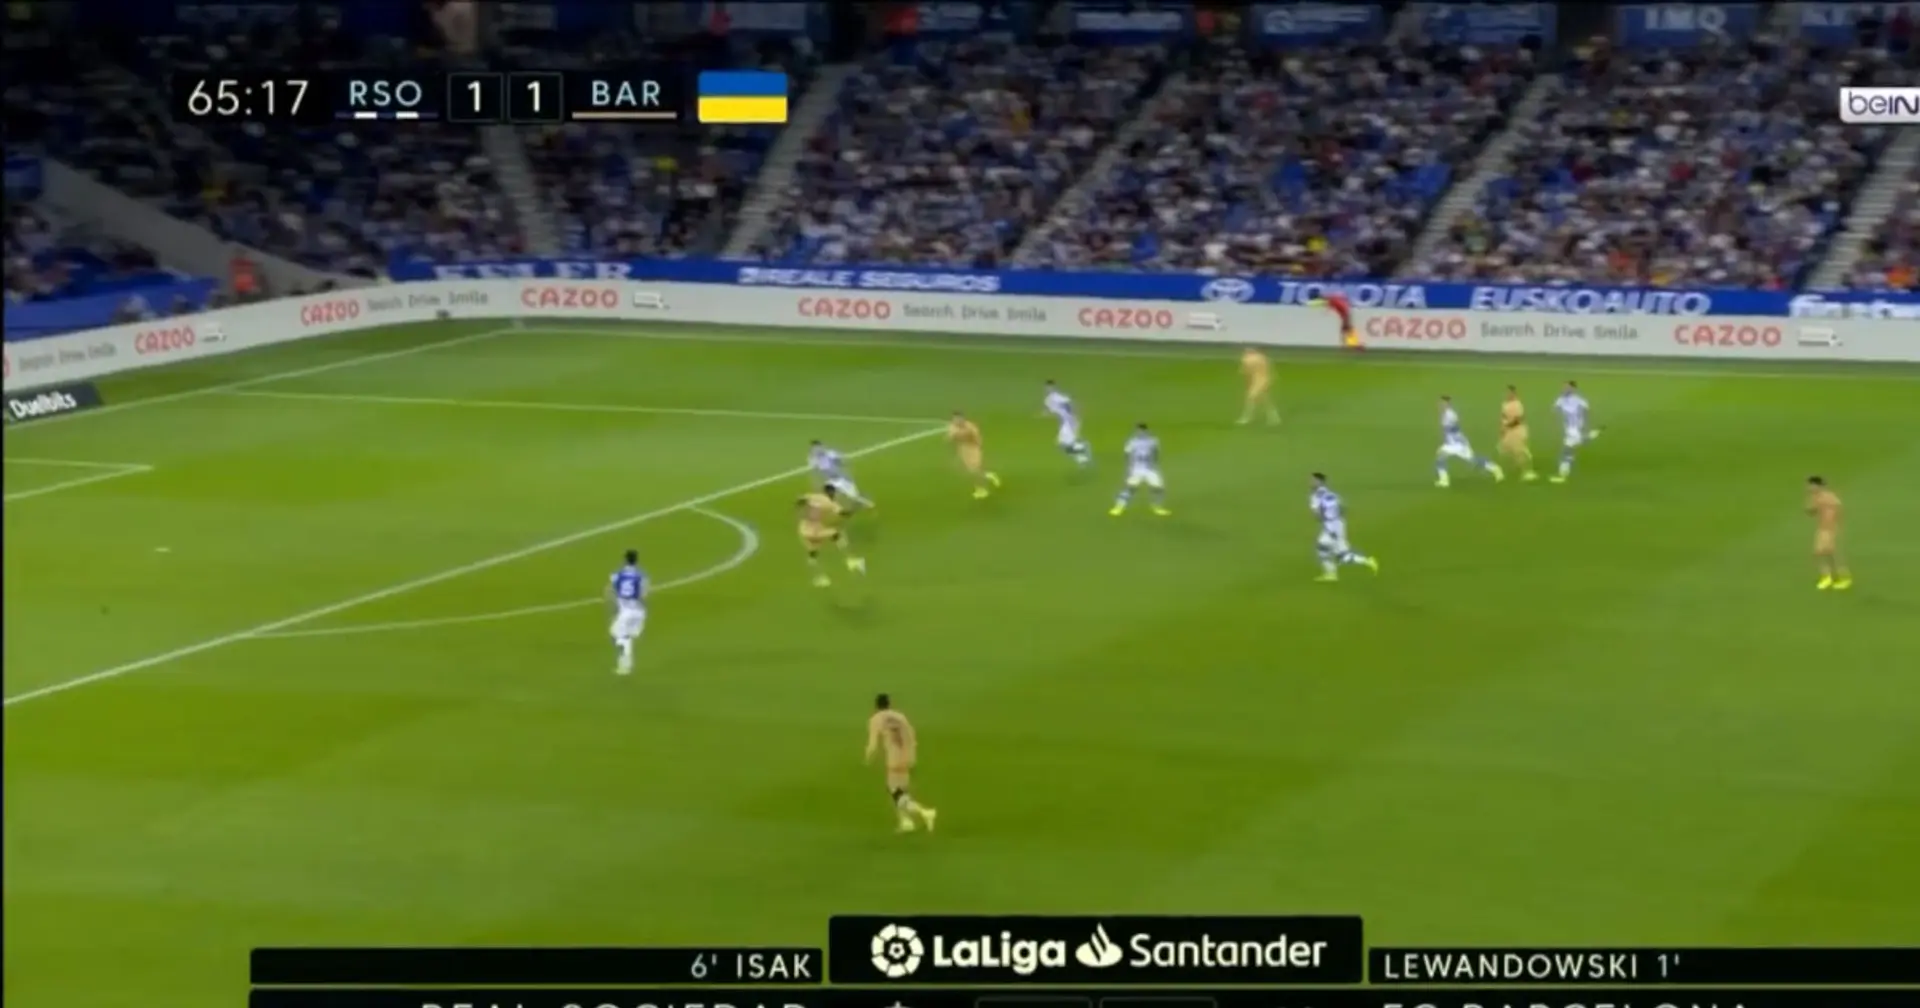 b962ae47 0a81 4d3f a14f ed217b0abfc0?width=1920&quality=75 Not just Dembele and Fati – 4 footballers that created Barca's winning goal against Real Sociedad